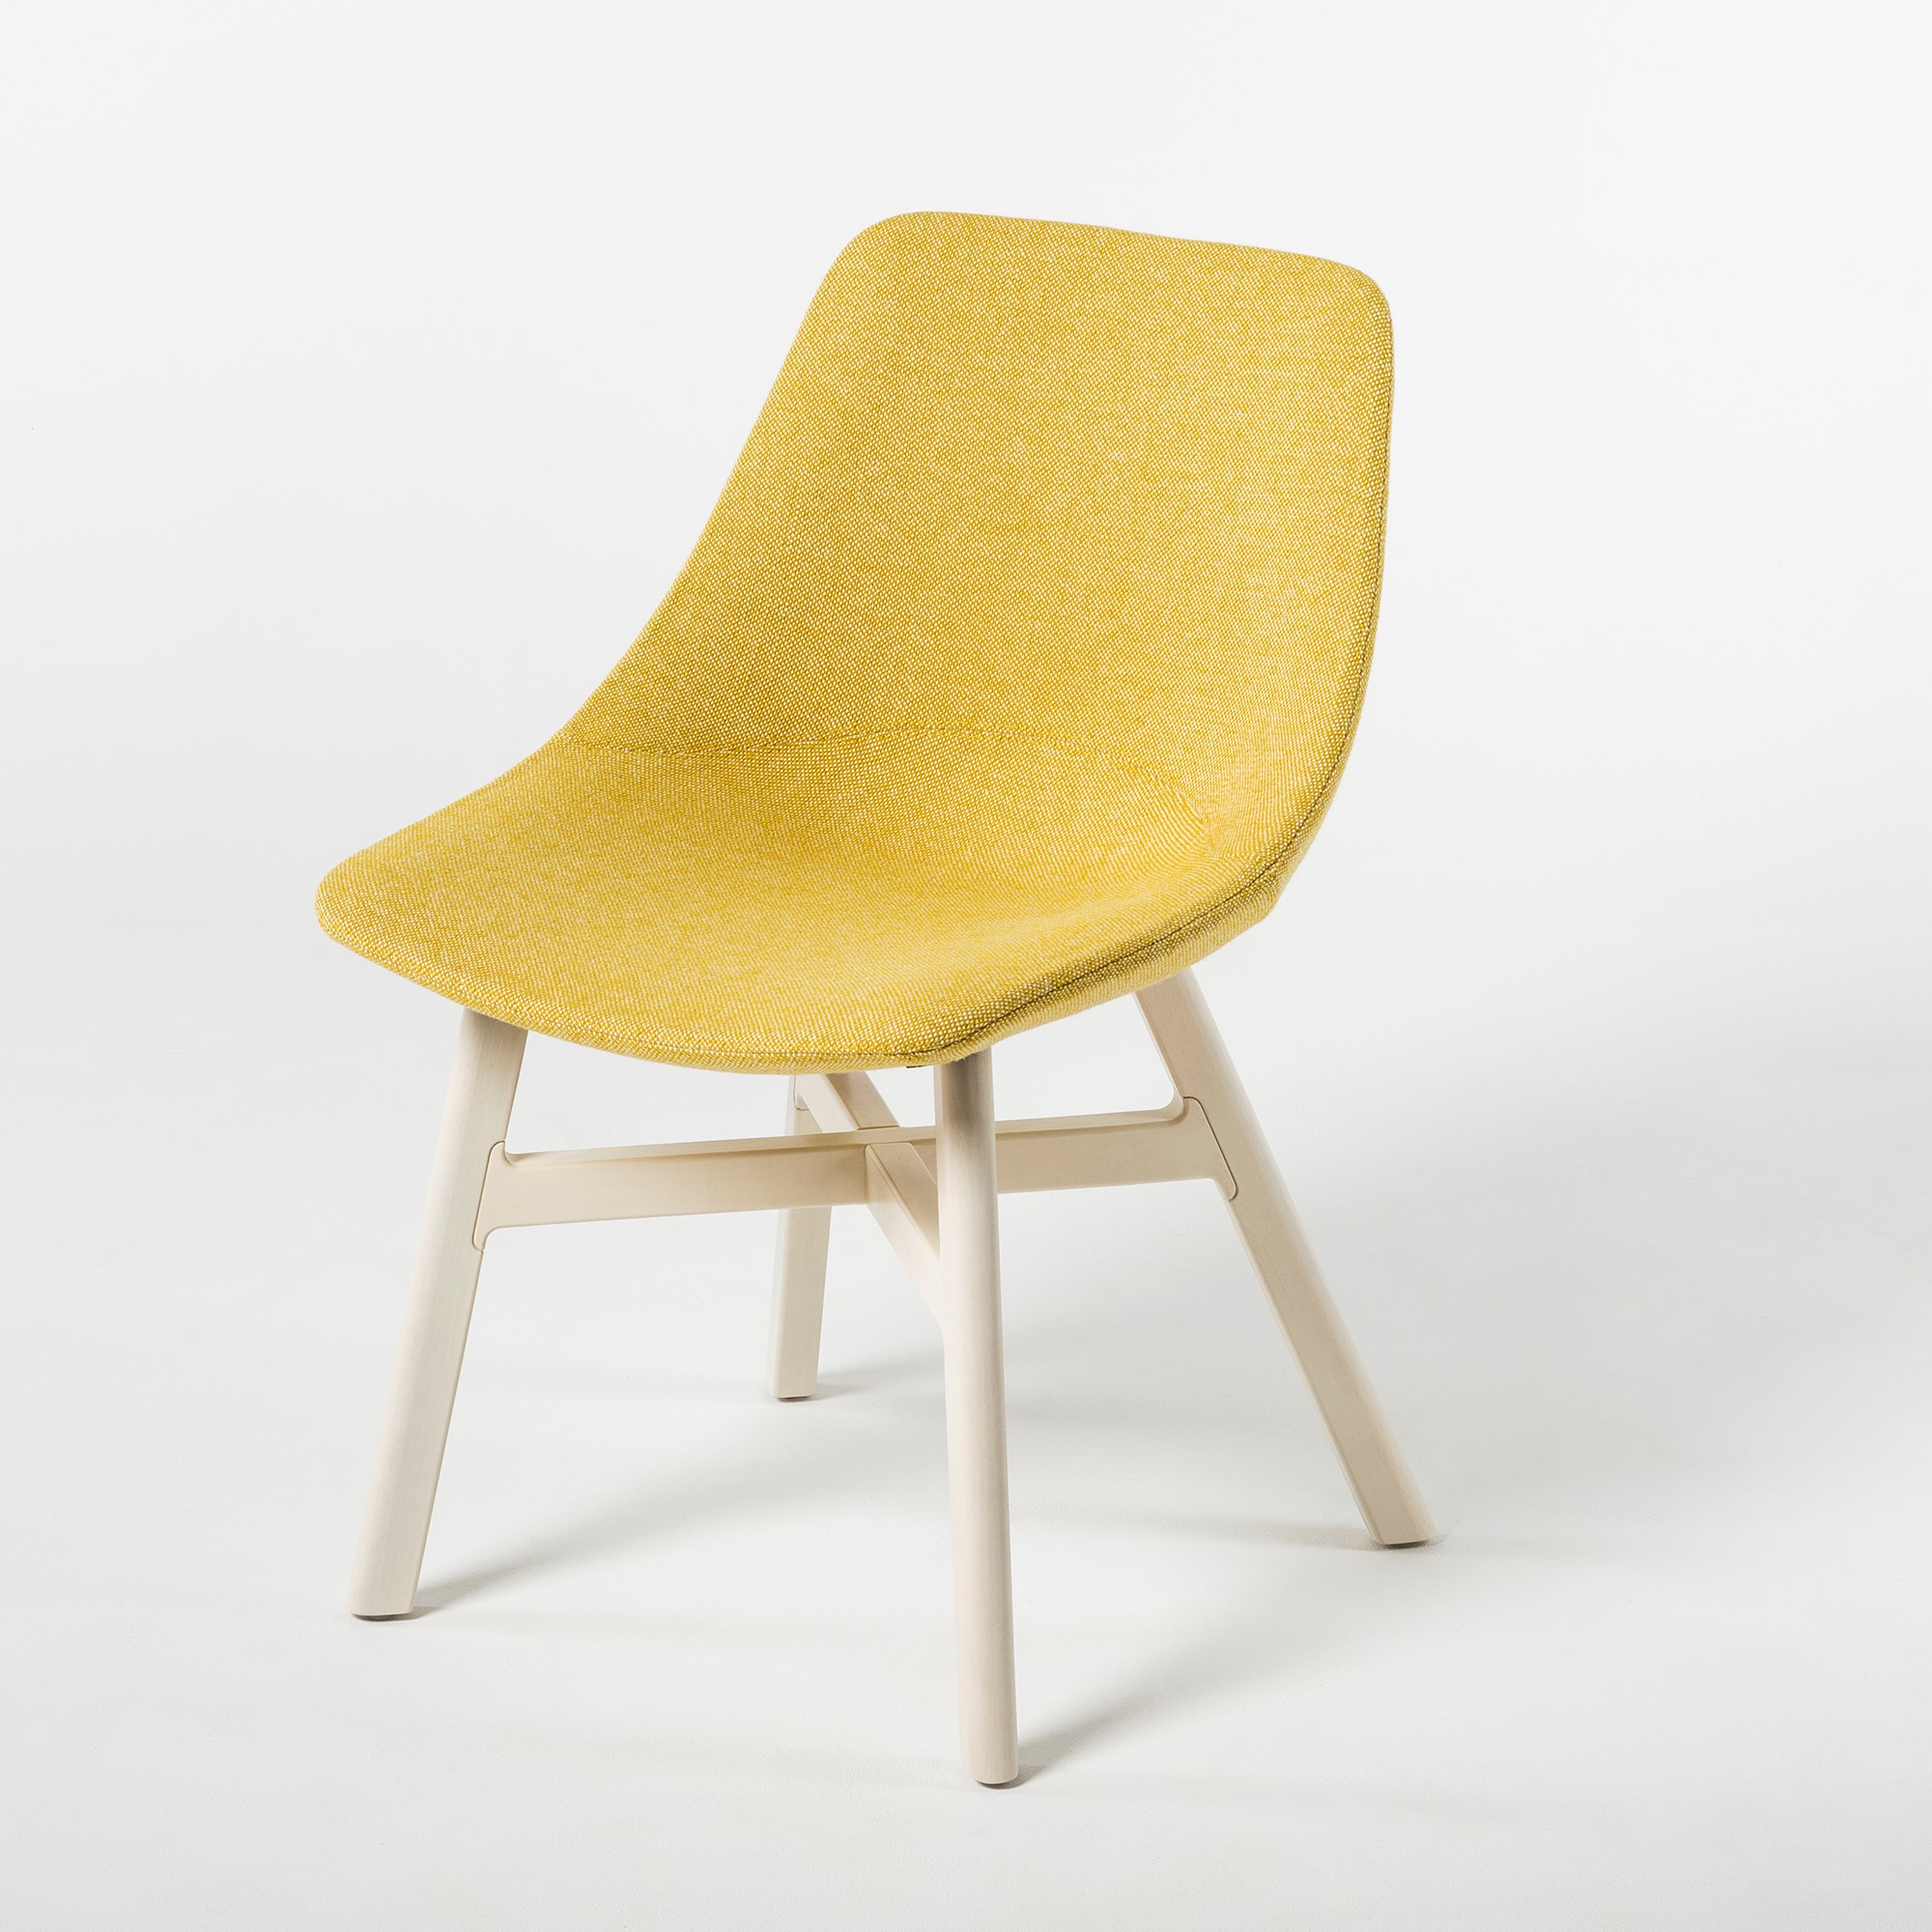 MISHELL_packshot_chair_wooden lacquer legs